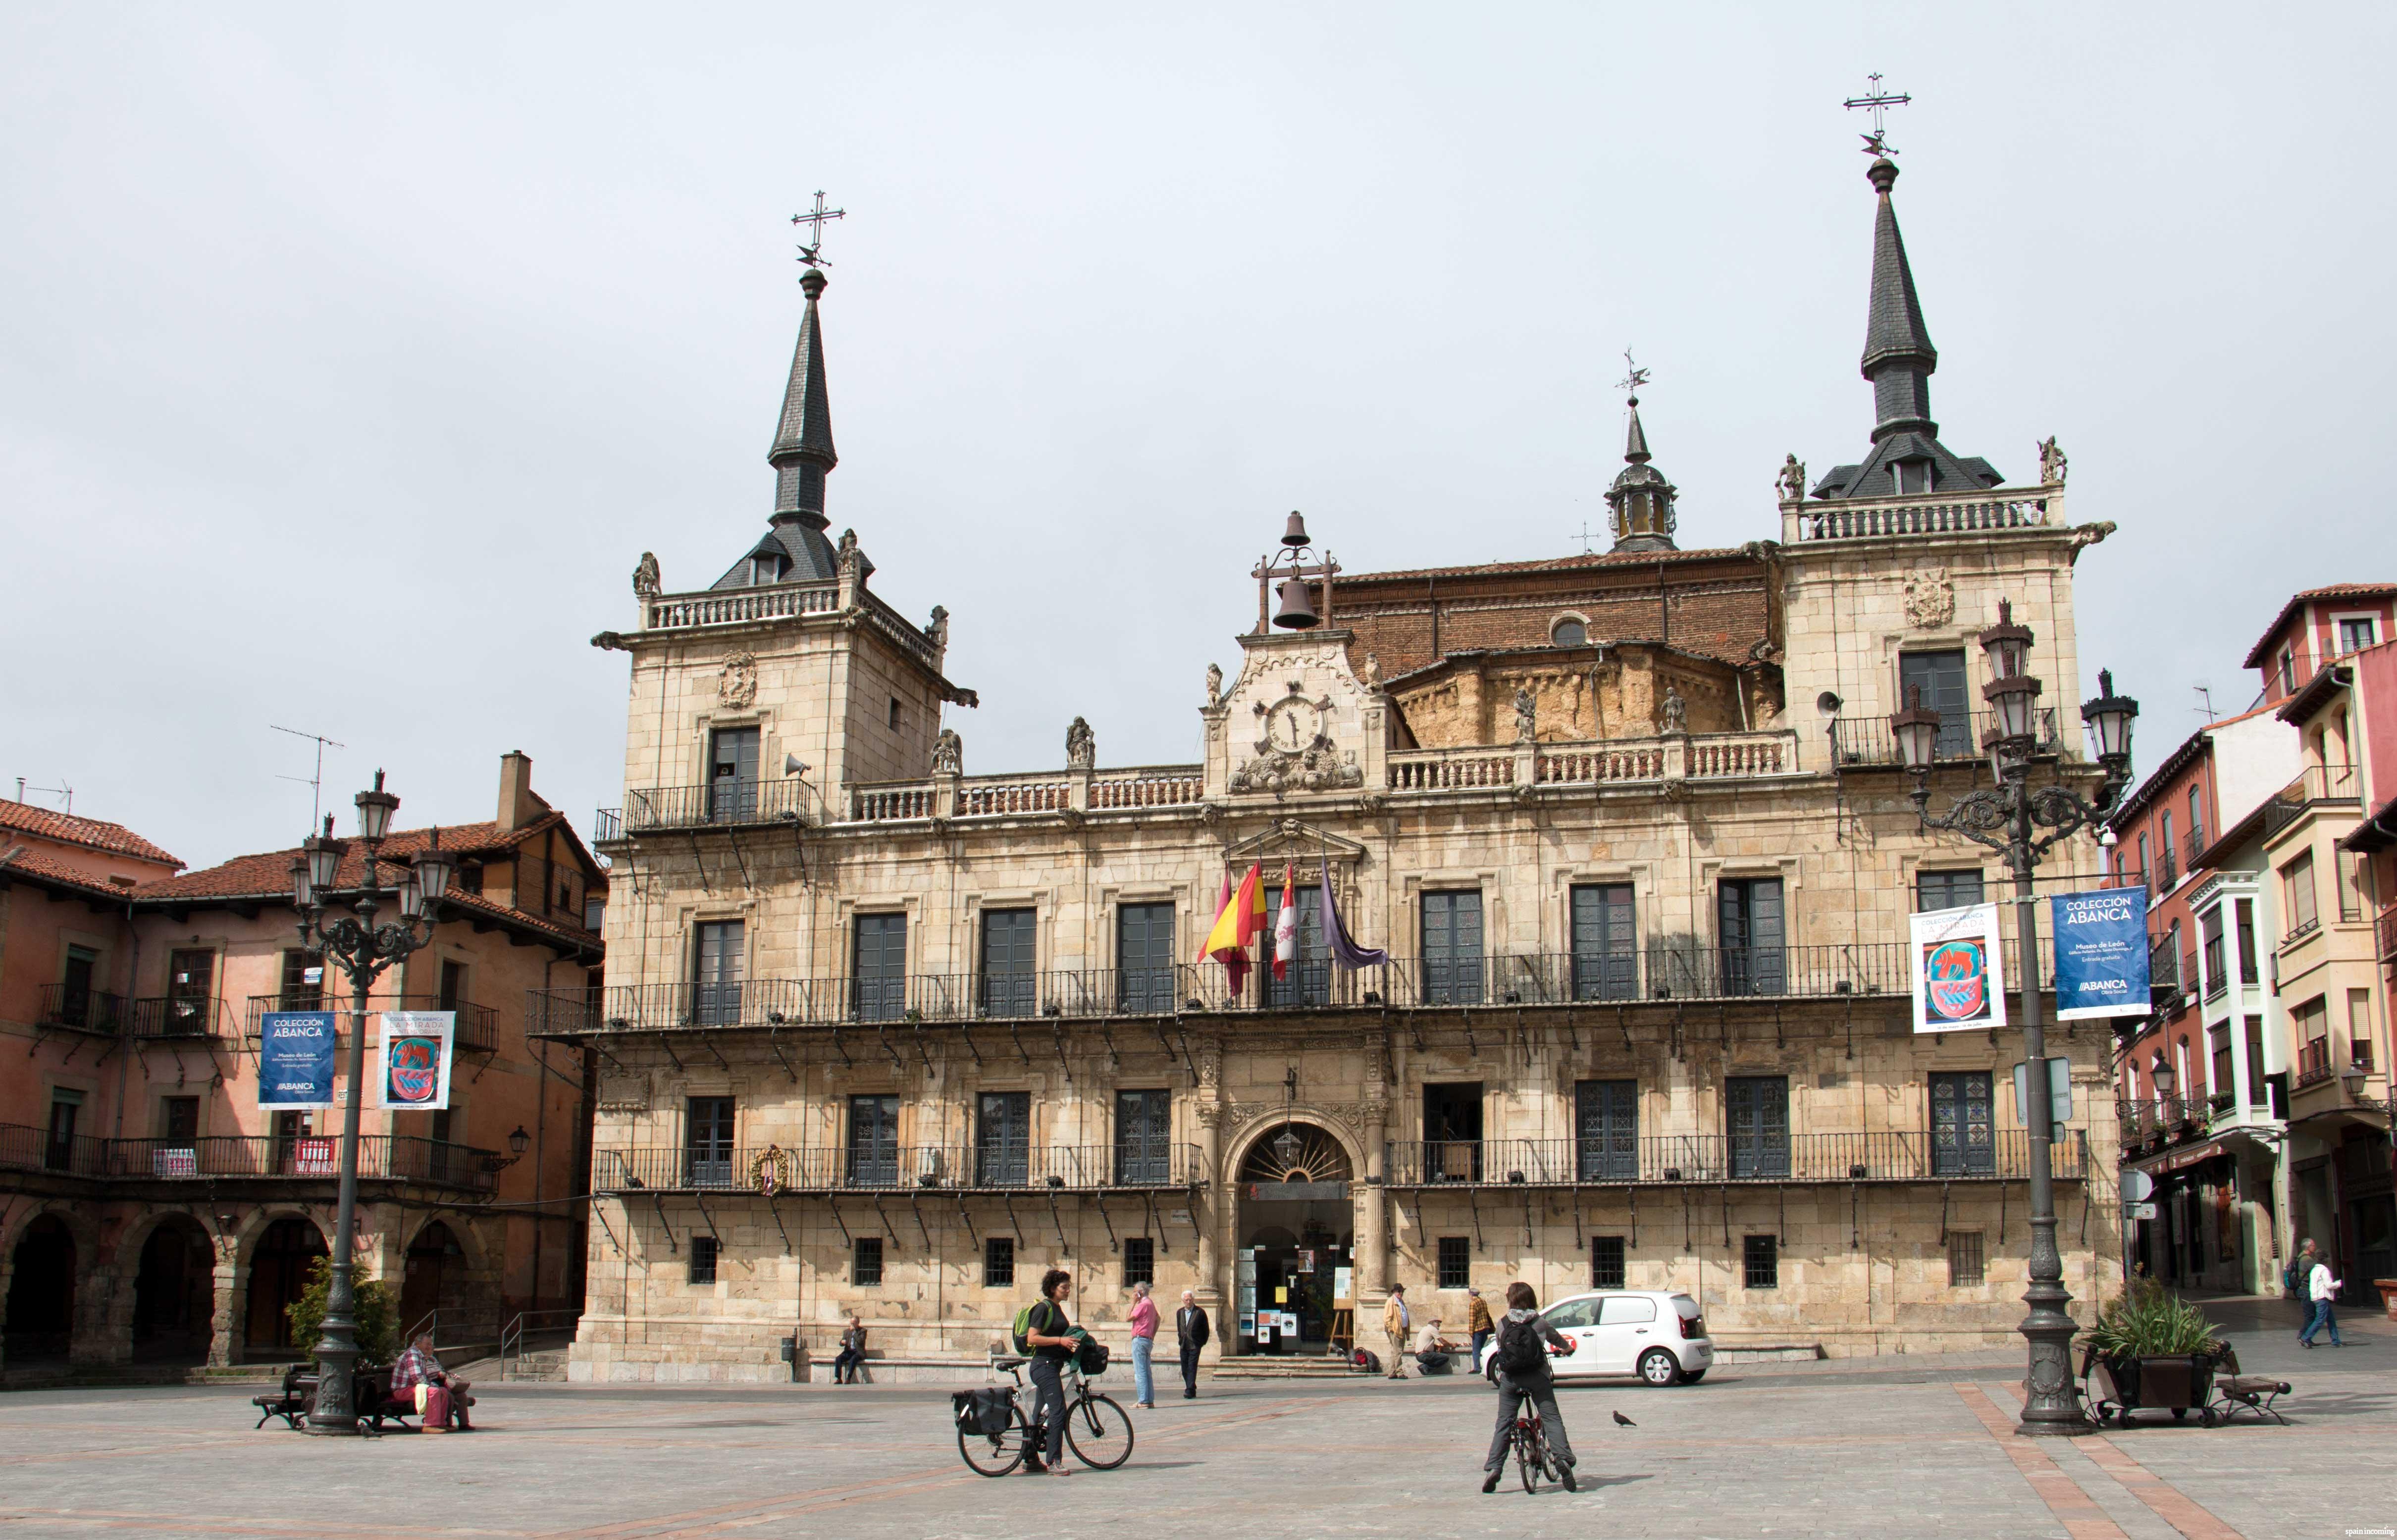 Nº 6 - León and its old town